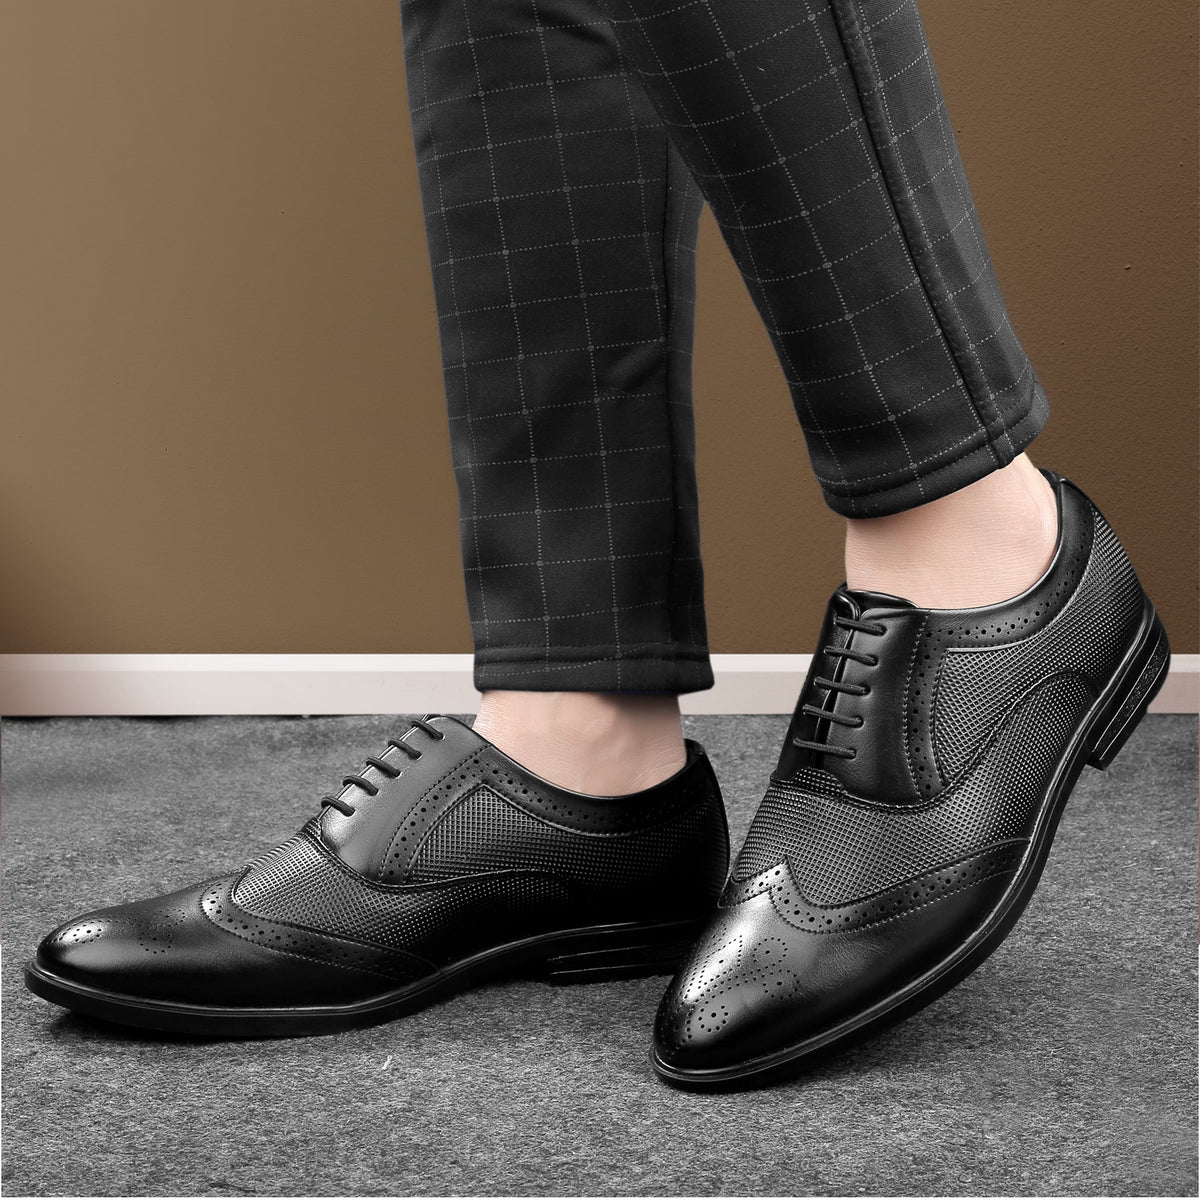 Bacca Bucci VICTORIA Formal Shoes with Superior Comfort | All Day Wear Office Or Party Lace-up Shoes